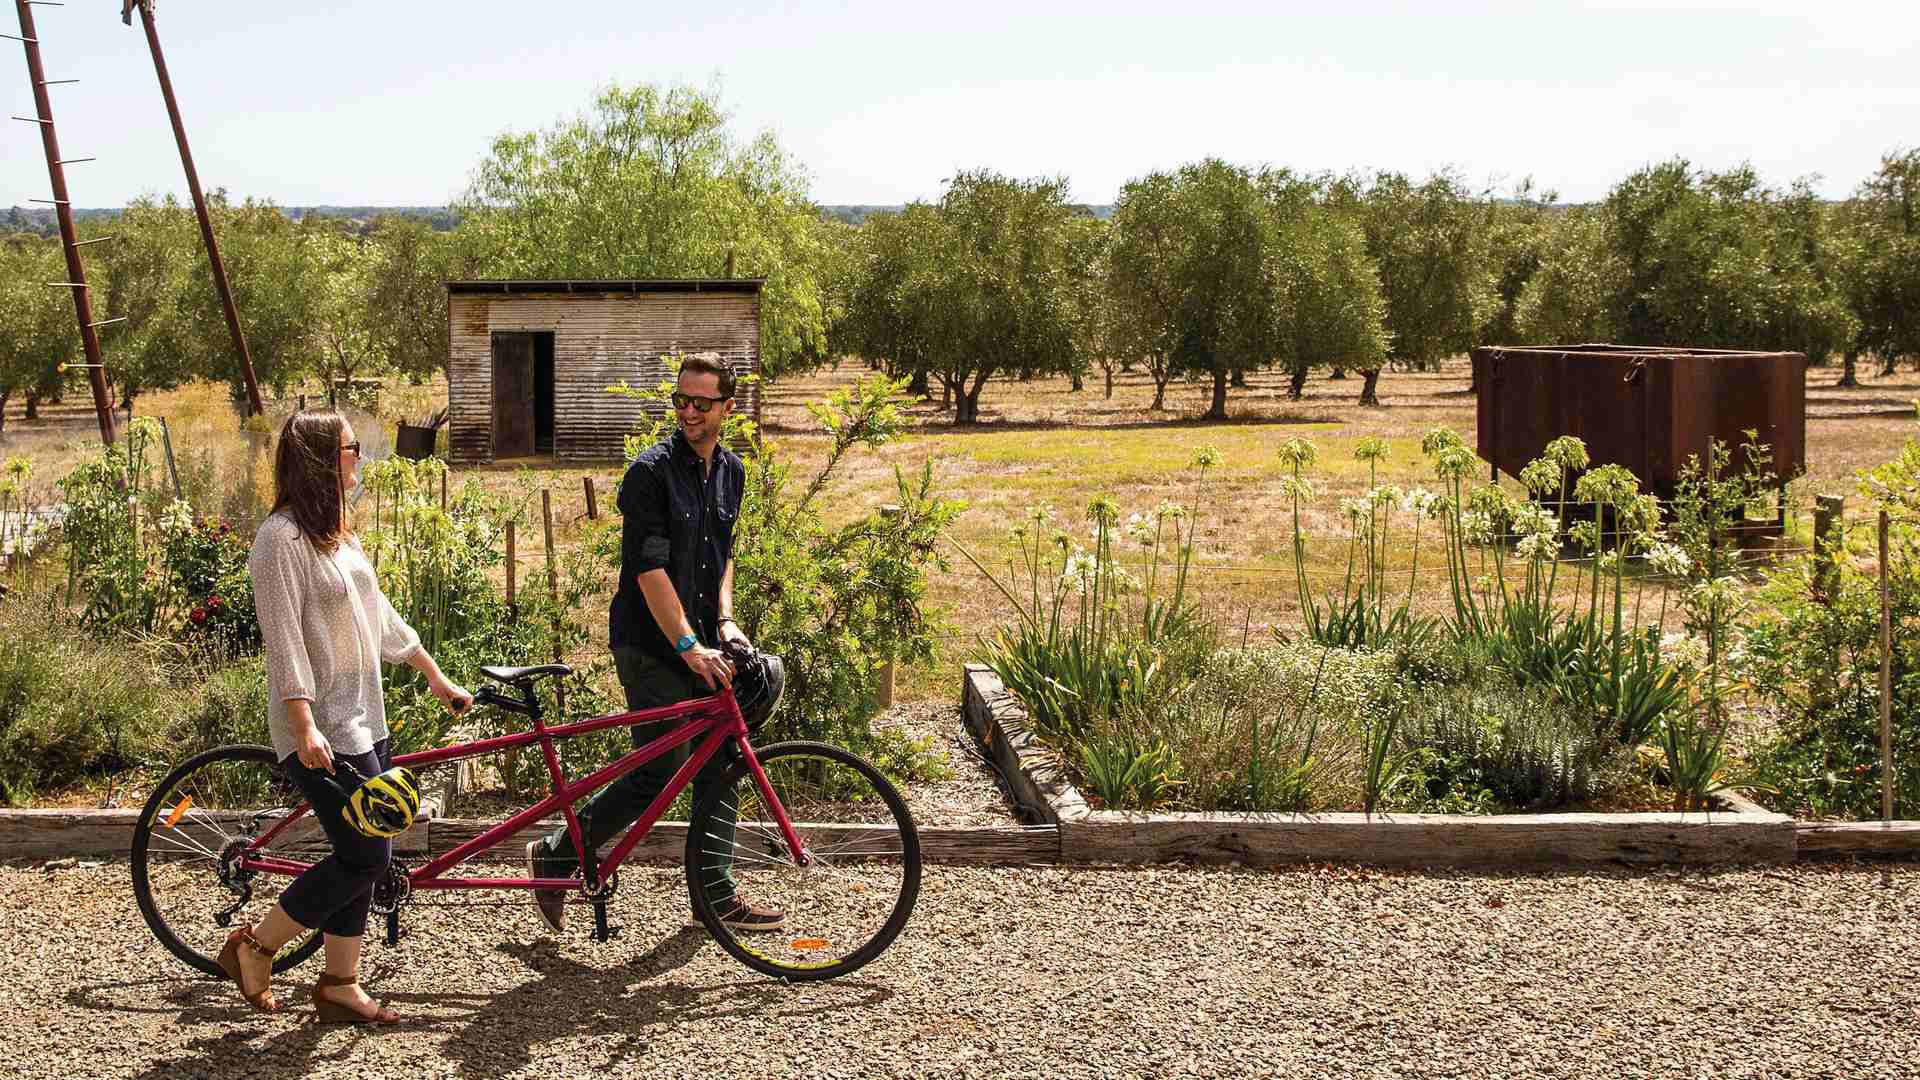 Cycle between top vineyards and restaurants on the <a href="https://www.visitvictoria.com/regions/high-country/things-to-do/outdoor-activities/cycling/vv-milawa-gourmet-ride">Milawa Gourmet Ride</a>